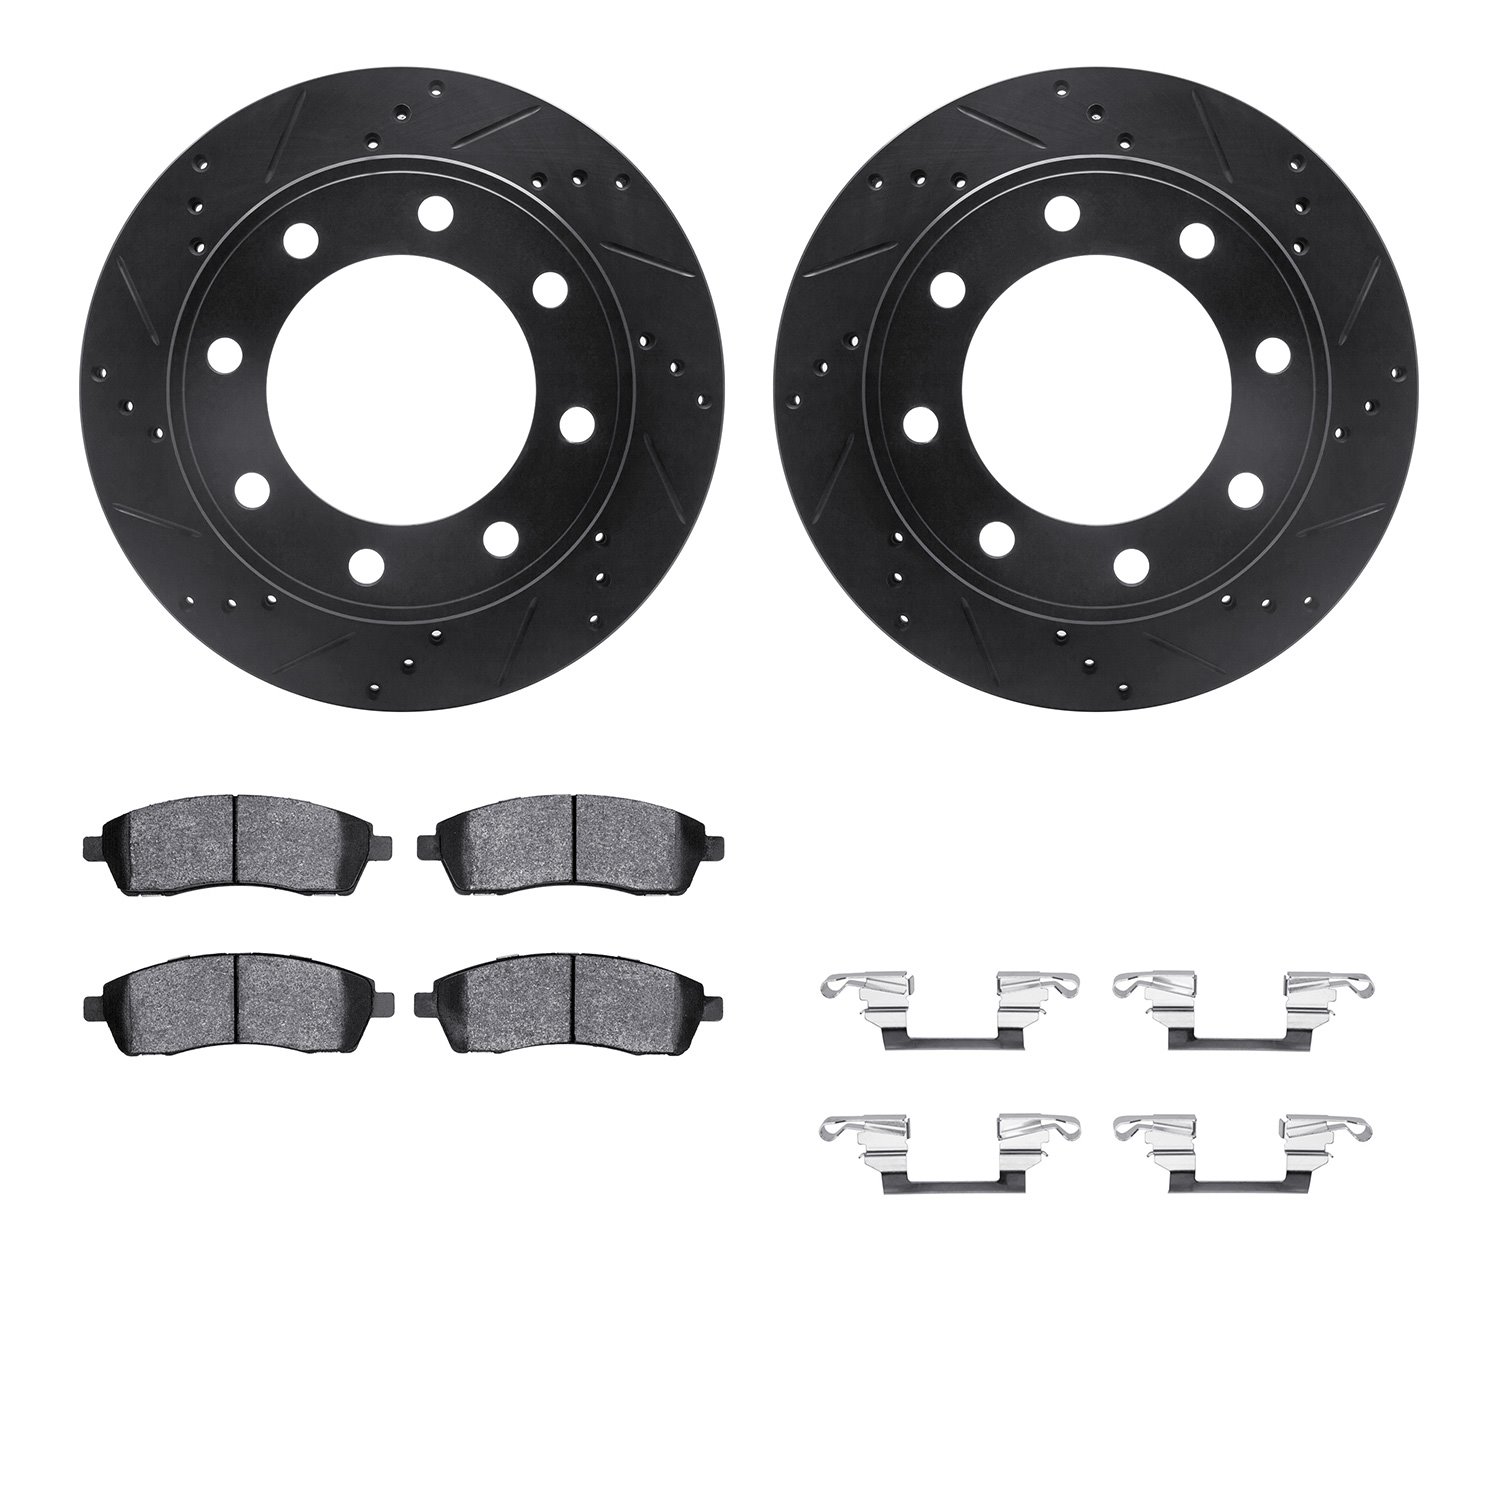 8412-54048 Drilled/Slotted Brake Rotors with Ultimate-Duty Brake Pads Kit & Hardware [Black], 1999-2005 Ford/Lincoln/Mercury/Maz